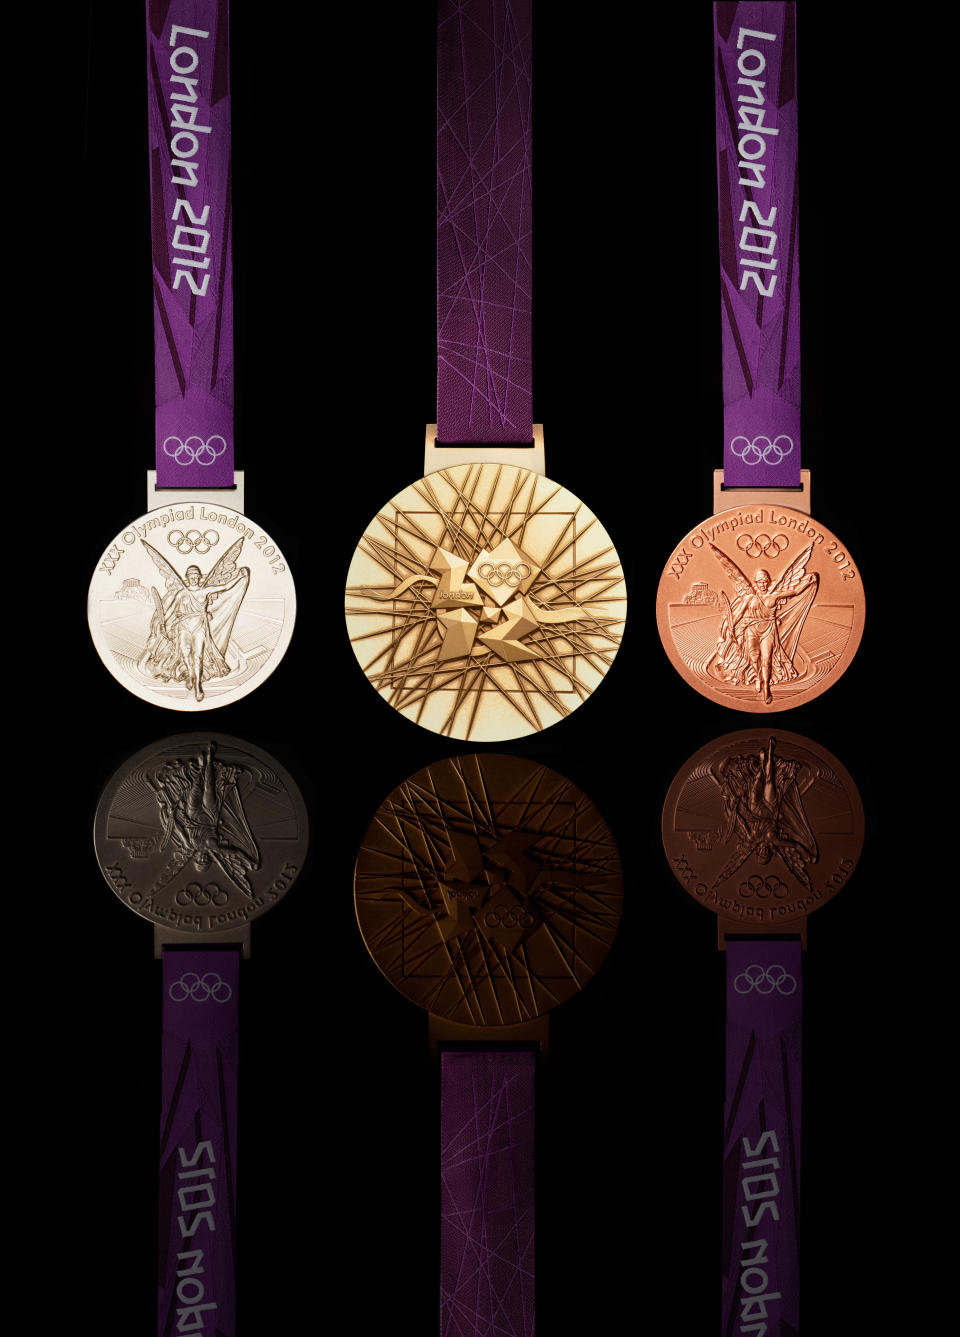 LONDON, UNITED KINGDOM -JULY 27: This handout image supplied by The London Organising Committee of the Olympic and Paralympic Games (LOCOG), shows the medals that will be awarded in the London 2012 Olympic Games, designed by British artist David Watkins. The medal depicts 'Nike', the Greek Goddess of Sport, stepping out of a scene depicting of the Parthenon and Panathinaiko Stadium. The one year countdown to the London 2012 Olympic games was marked with a unique ceremony in Trafalgar Square, with IOC President Jacques Rogge inviting the world's athletes to compete in next summer's games. (Photo by LOCOG via Getty Images)